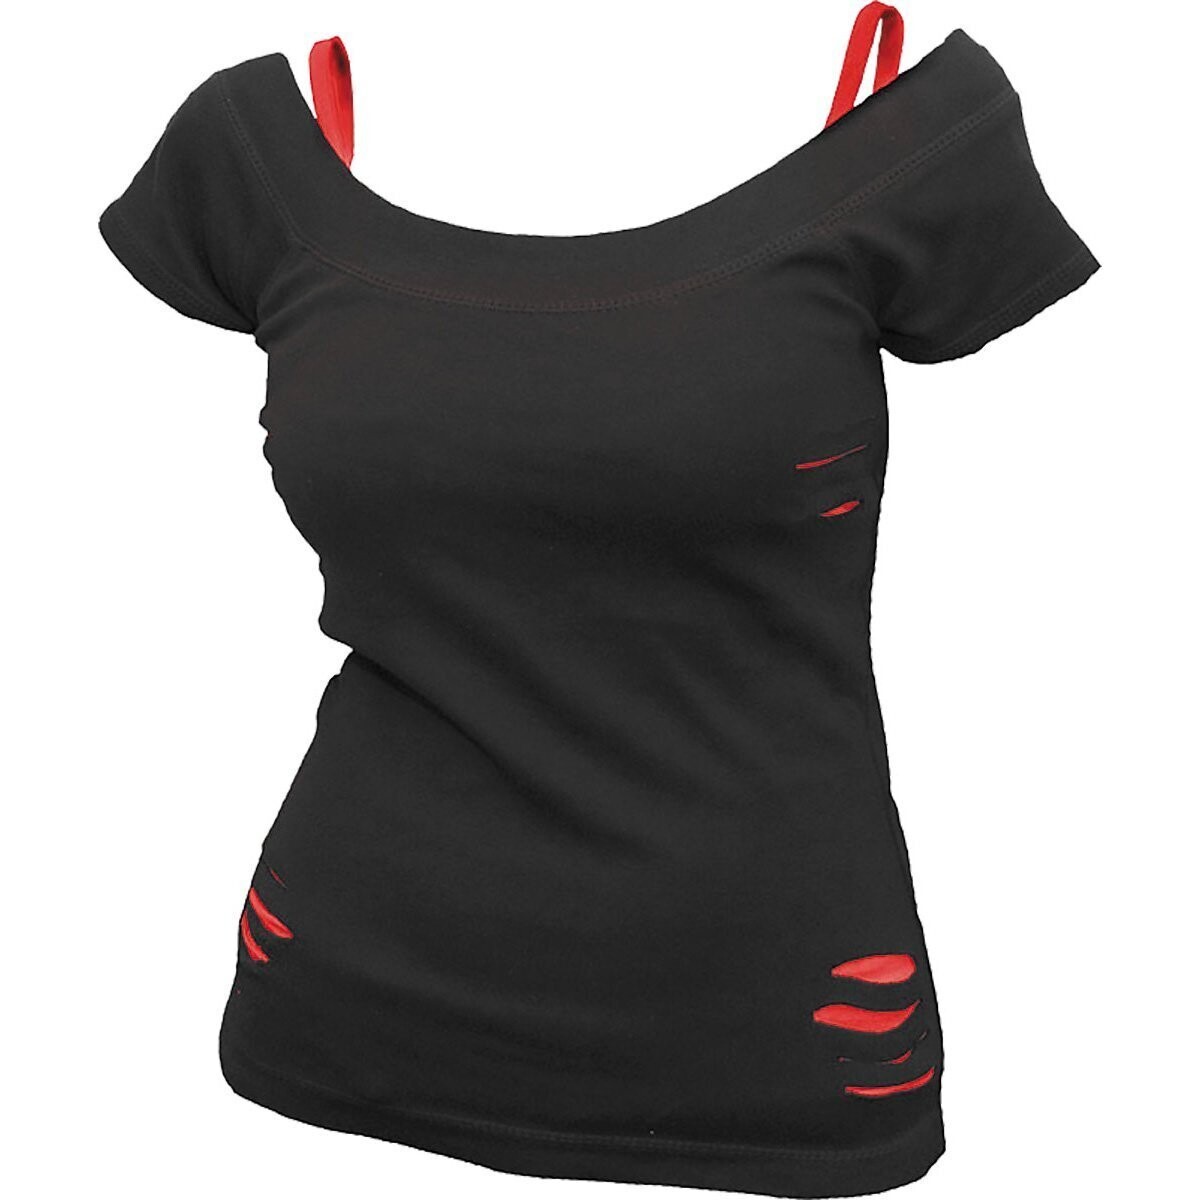 URBAN FASHION - 2in1 Red Ripped Top Black